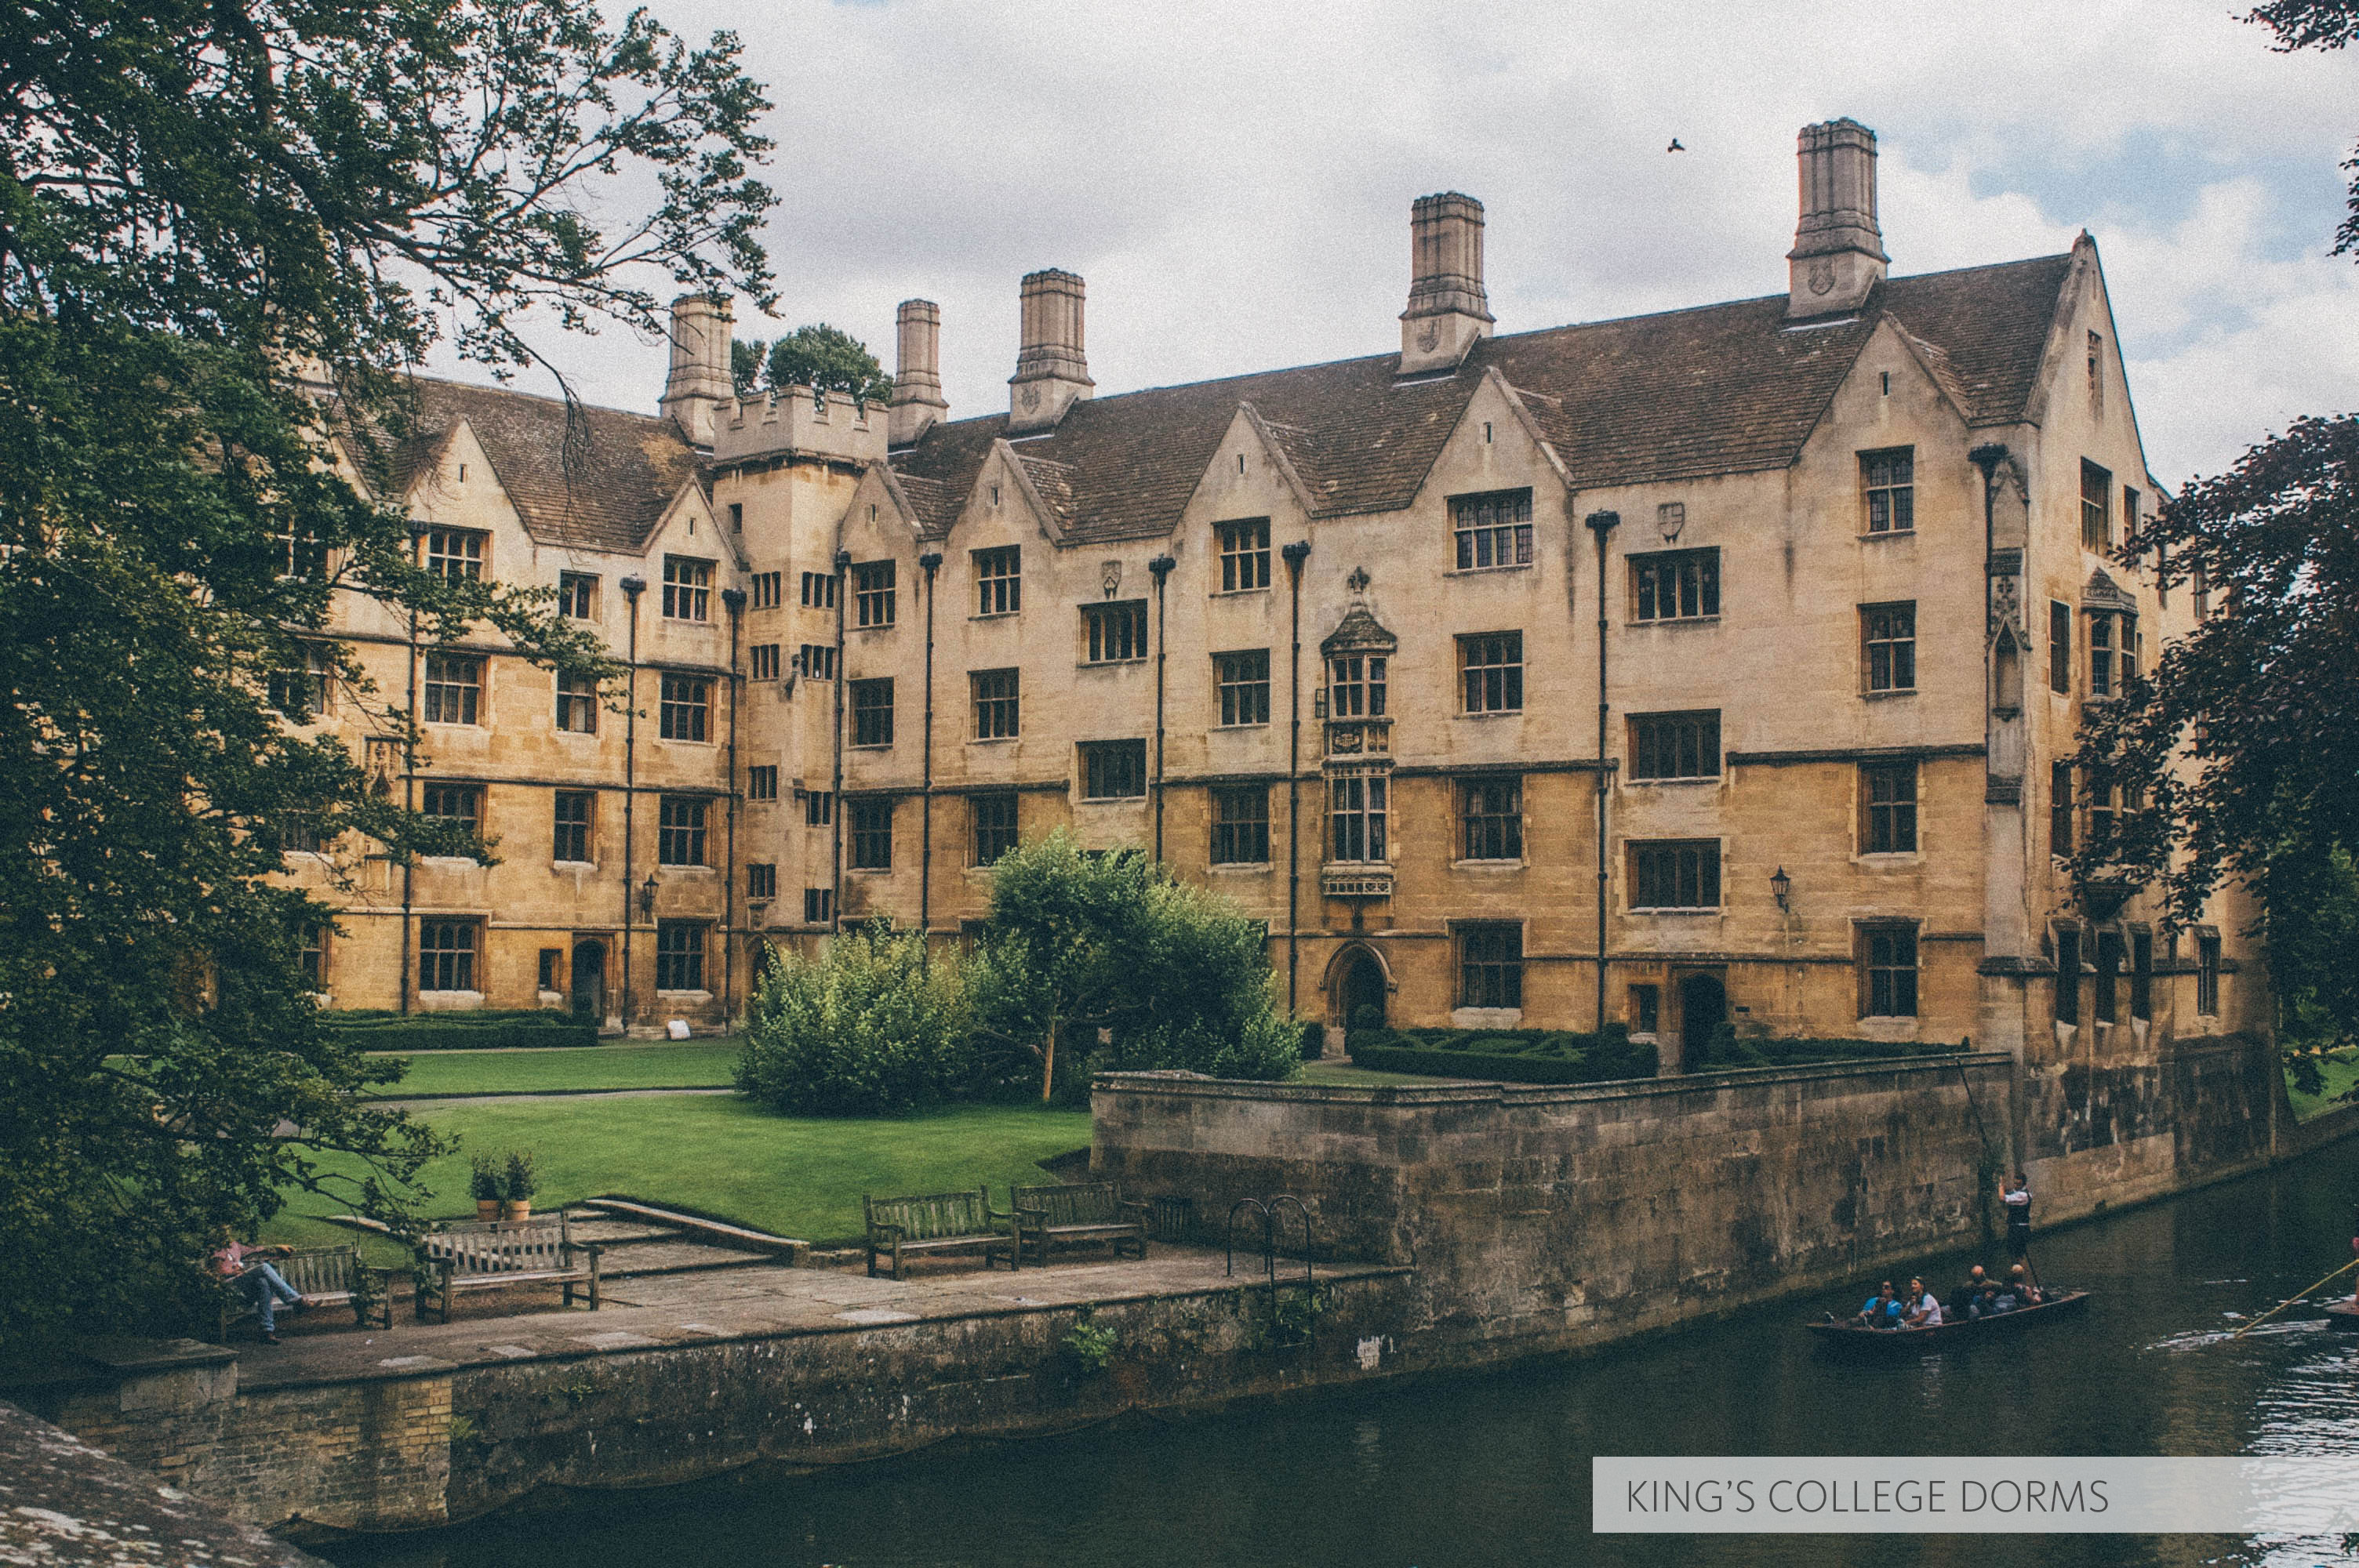 England study abroad - photo story by Jacqueline Woo